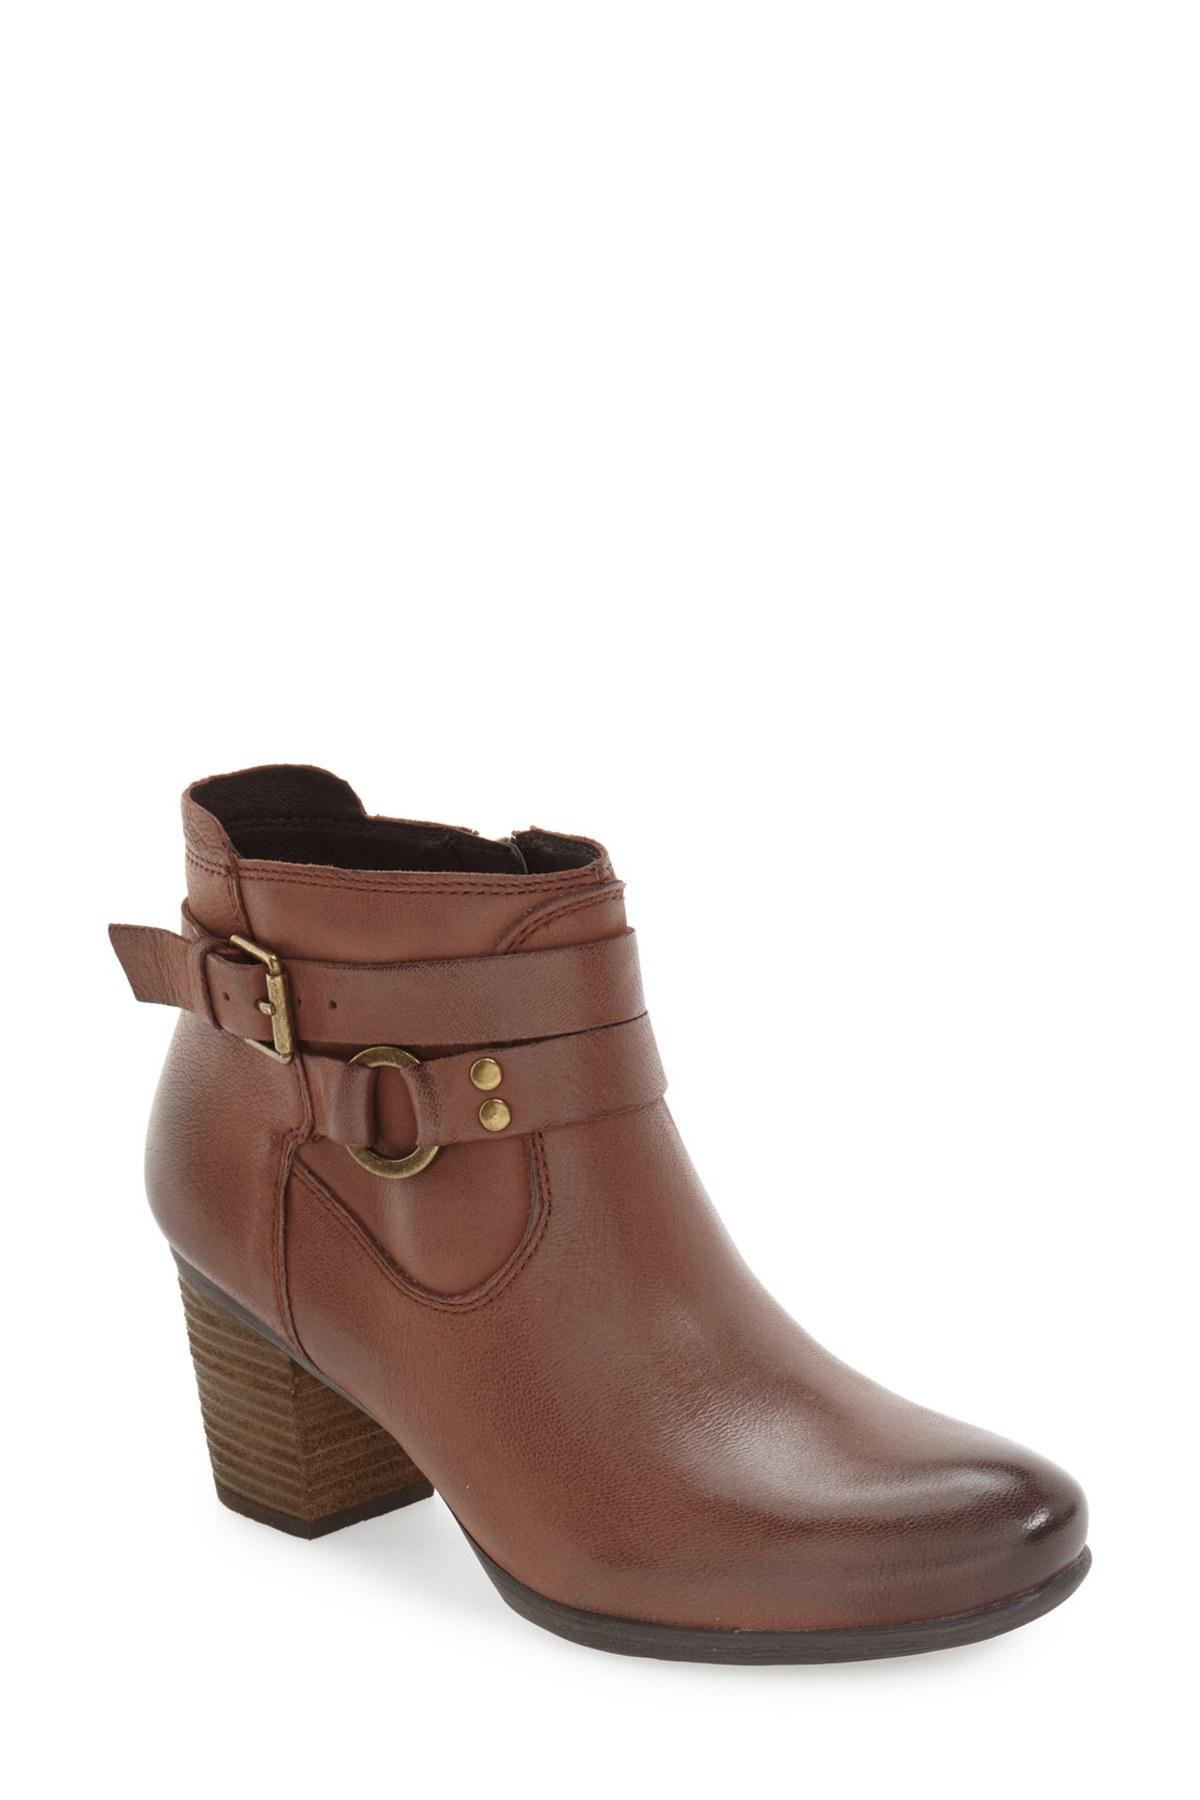 Josef Seibel Britney 50 Ankle Strap Boots in Brown | Lyst